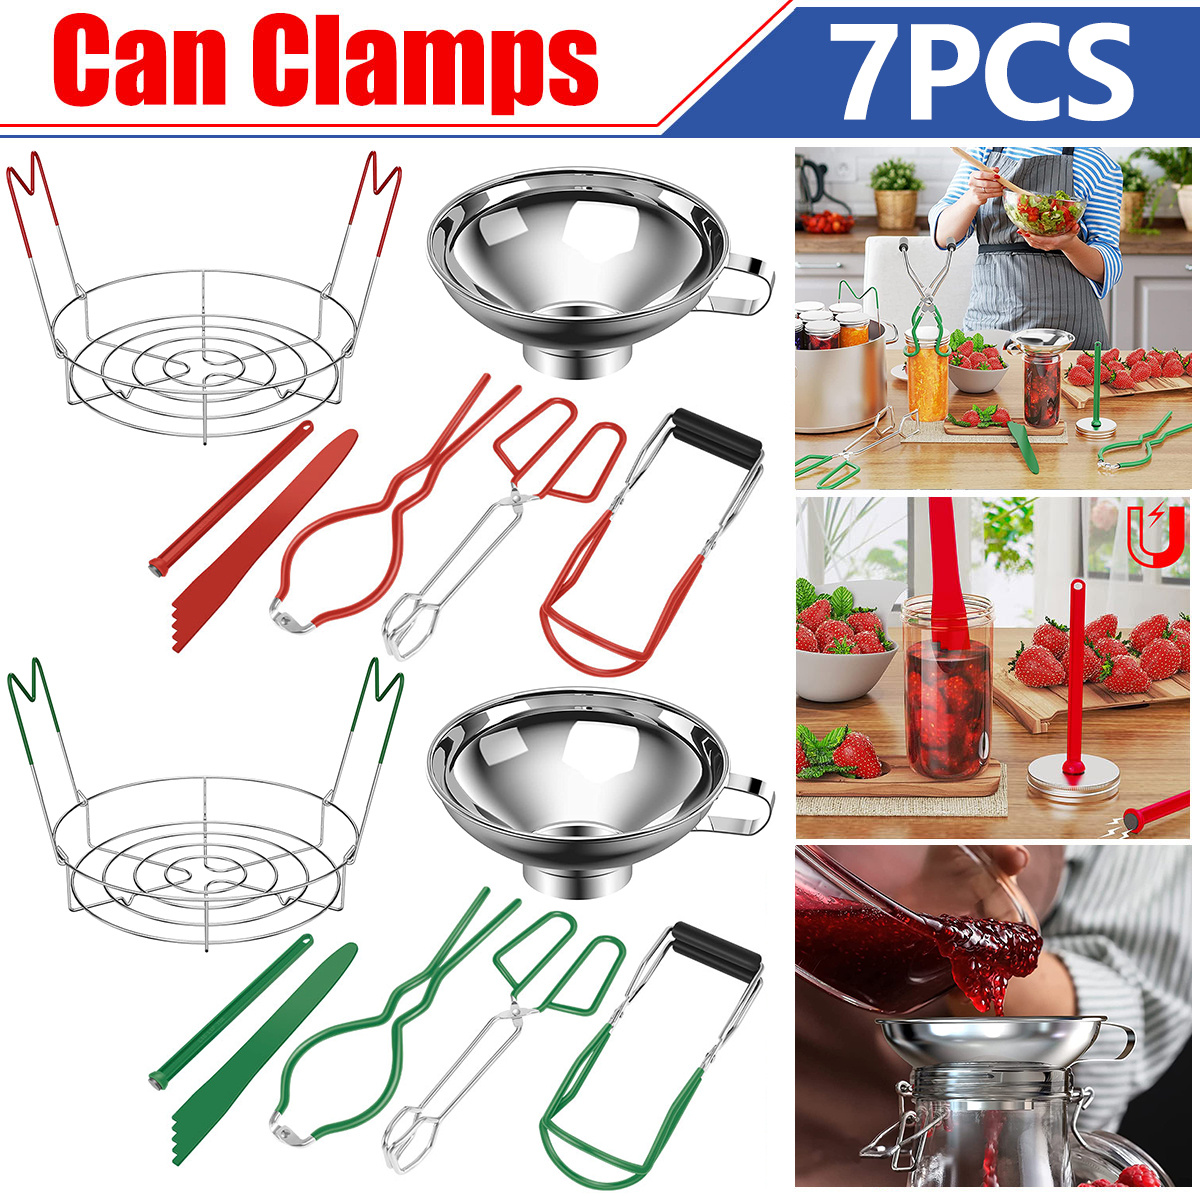 7Pcs Canning Supplies Starter Kit Canning Tools Set Stainless